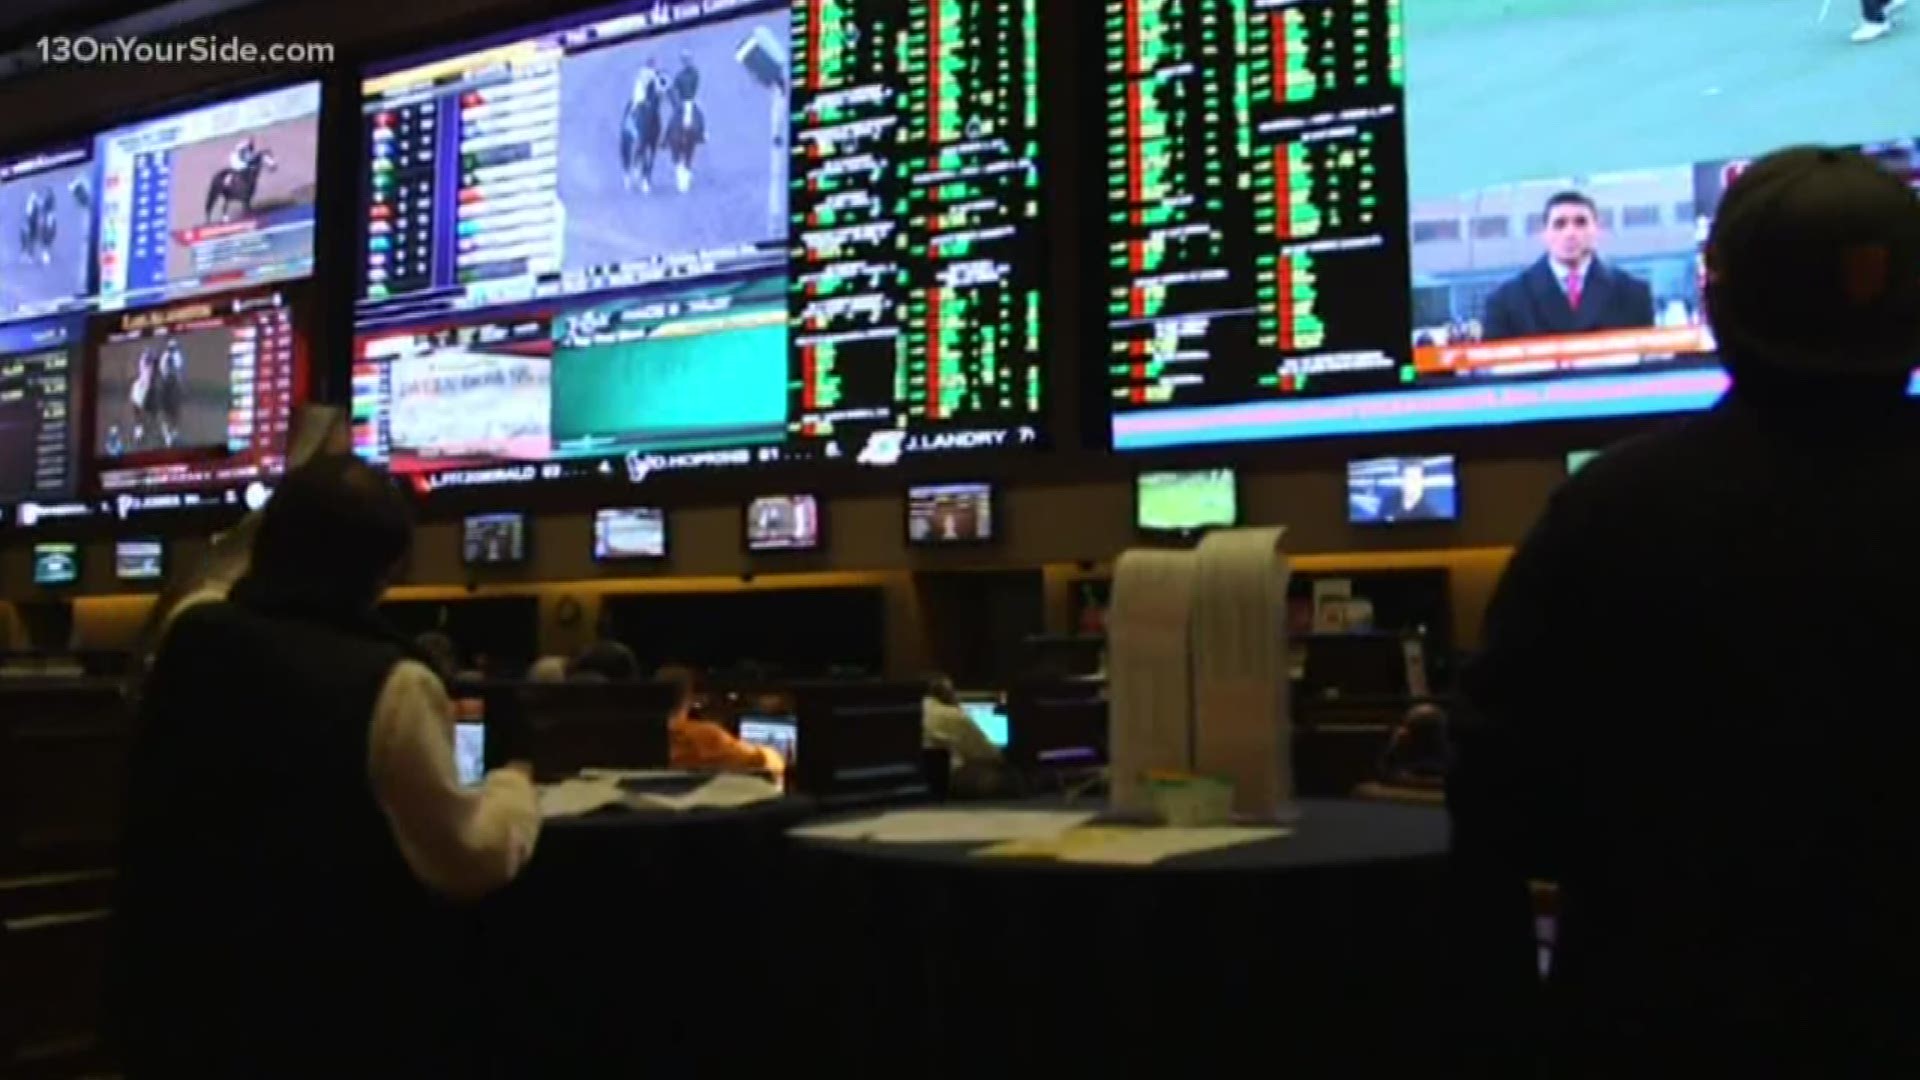 Michigan legalized sports betting and online gambling late last year.